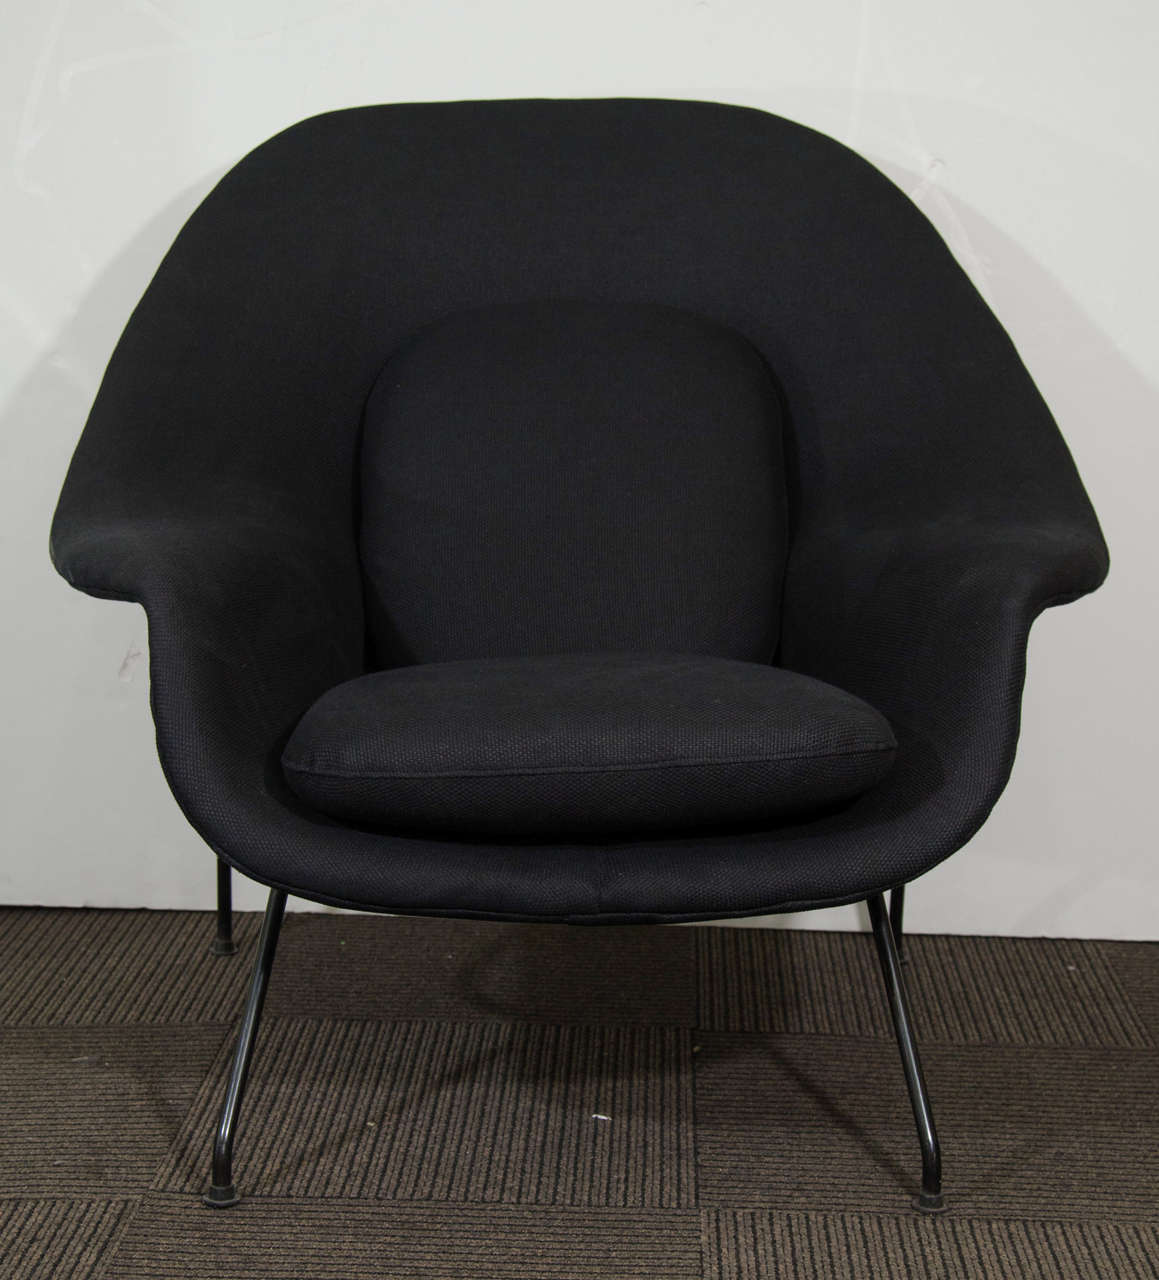 A vintage 1950s Womb chair and ottoman by Eero Saarinen for Florence Knoll. Created with foam molded over a fiberglass shell, the chair and ottoman have black lacquered metal legs. Newly reupholstered in black basket weave linen.  Loose cushions on